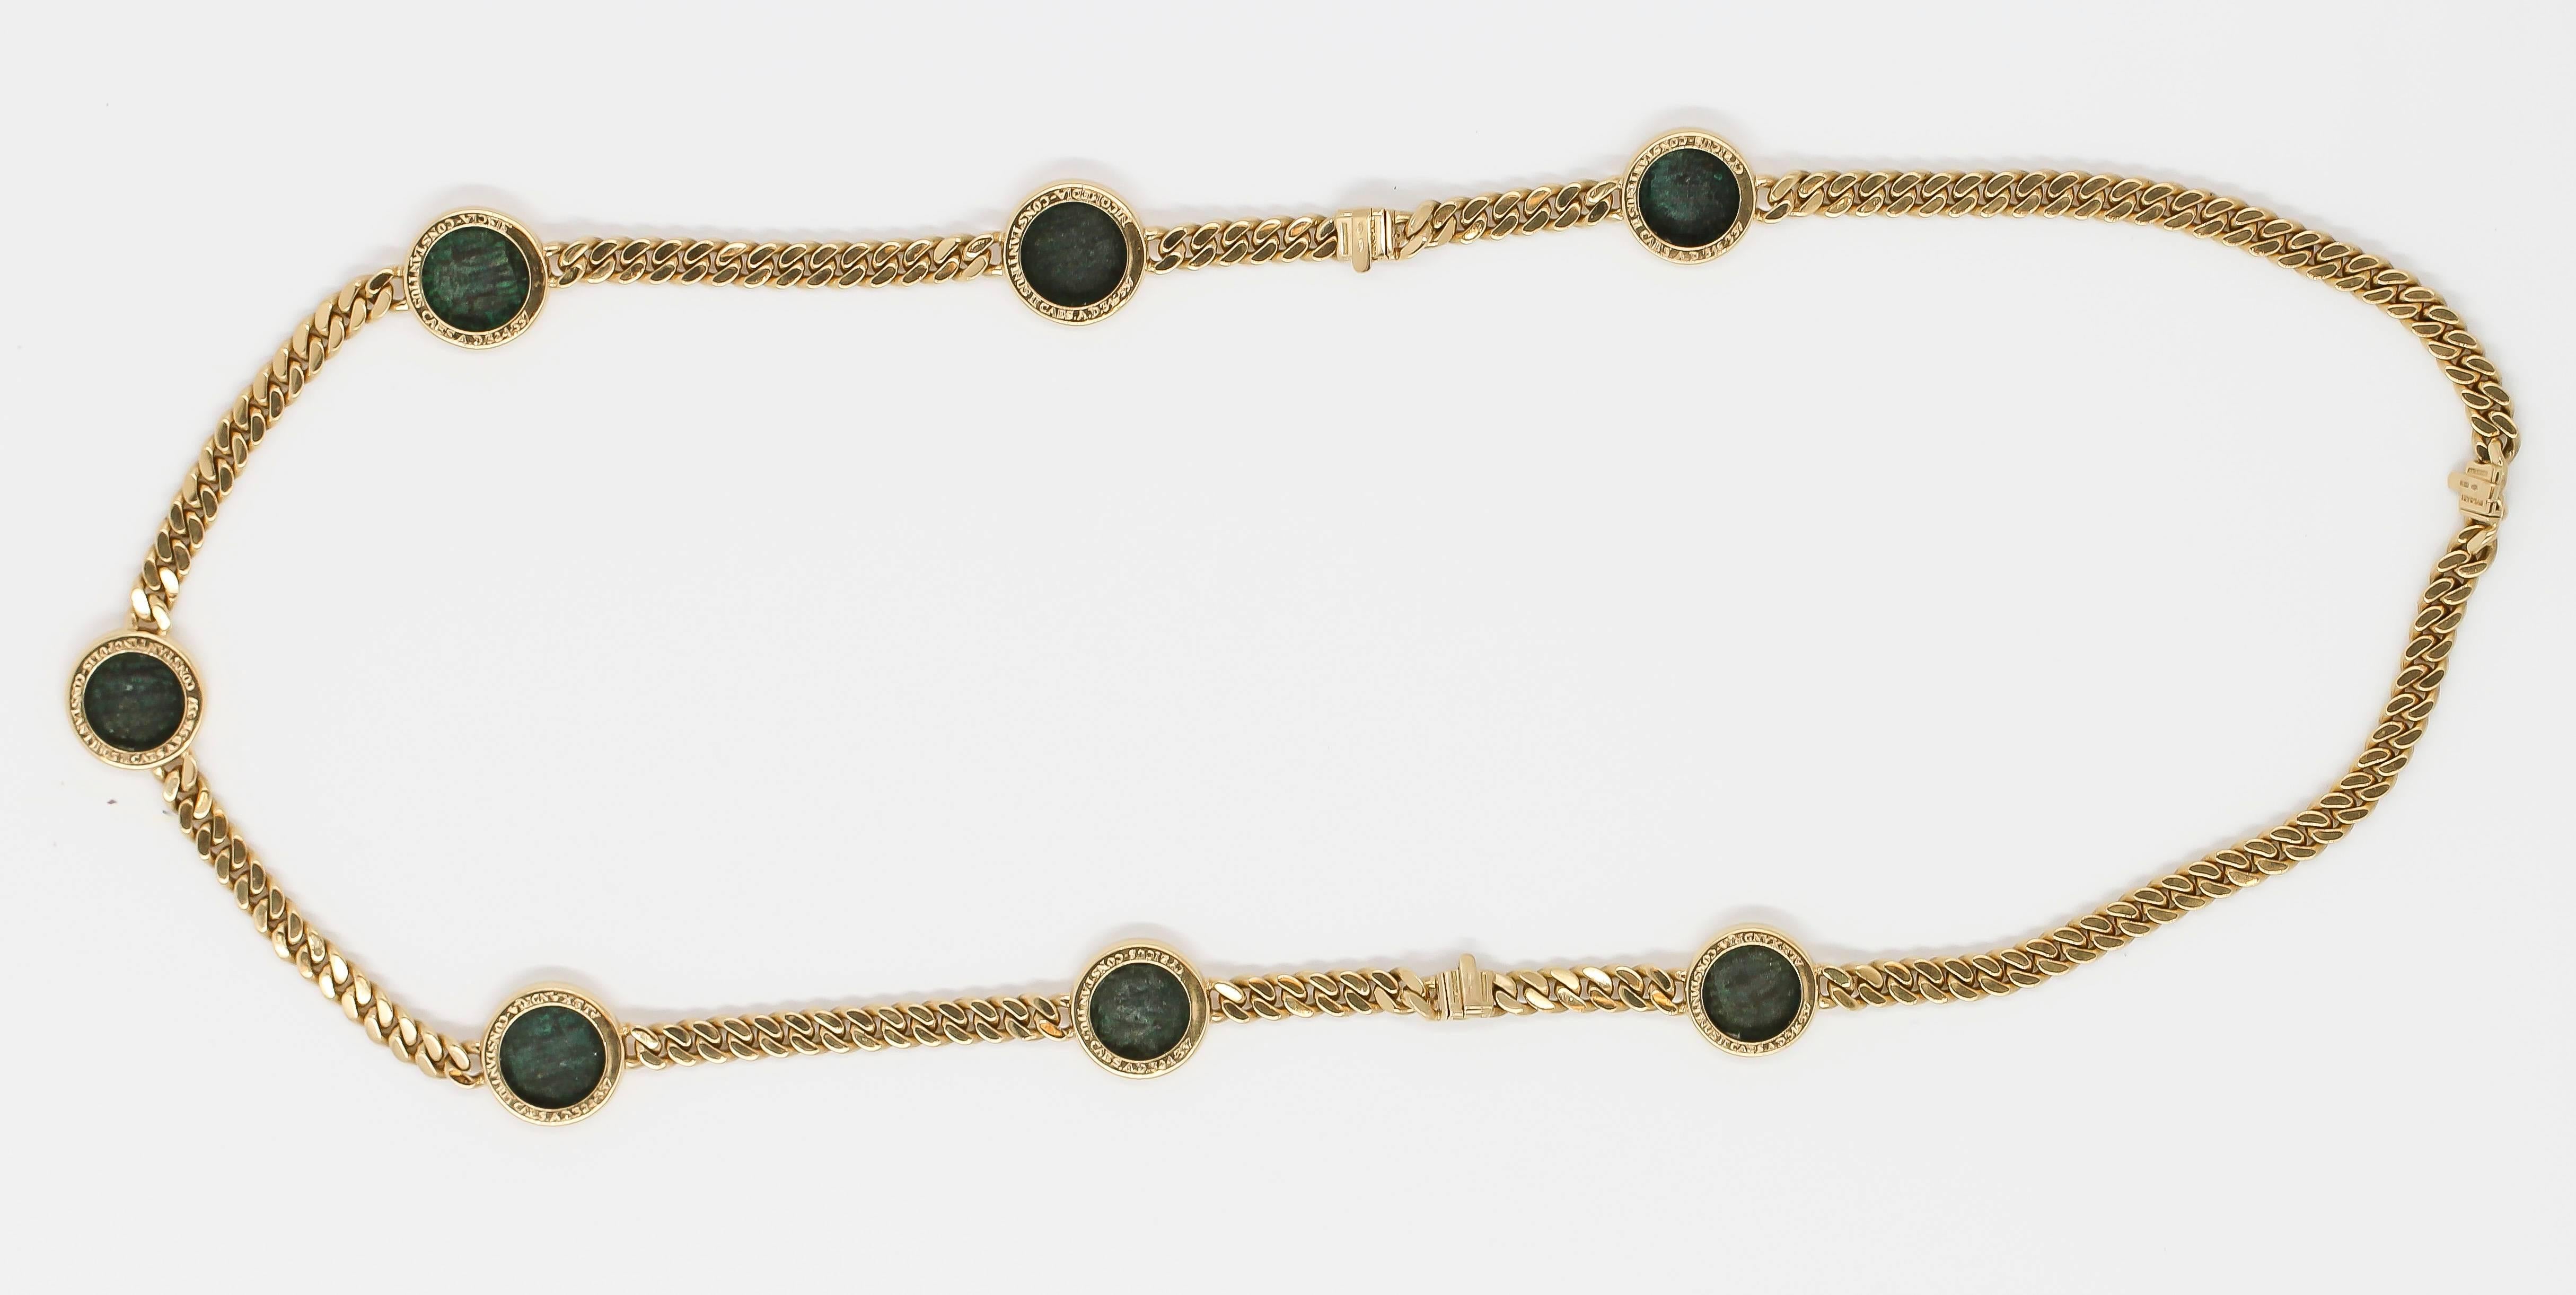 Rare and unusual 18K yellow gold and ancient coin link necklace and bracelet combination, by Bulgari circa 1970-80s. It features ancient Constantine II coins dating 316-337 A. D.  The Necklace combines with two bracelets to make one long necklace,